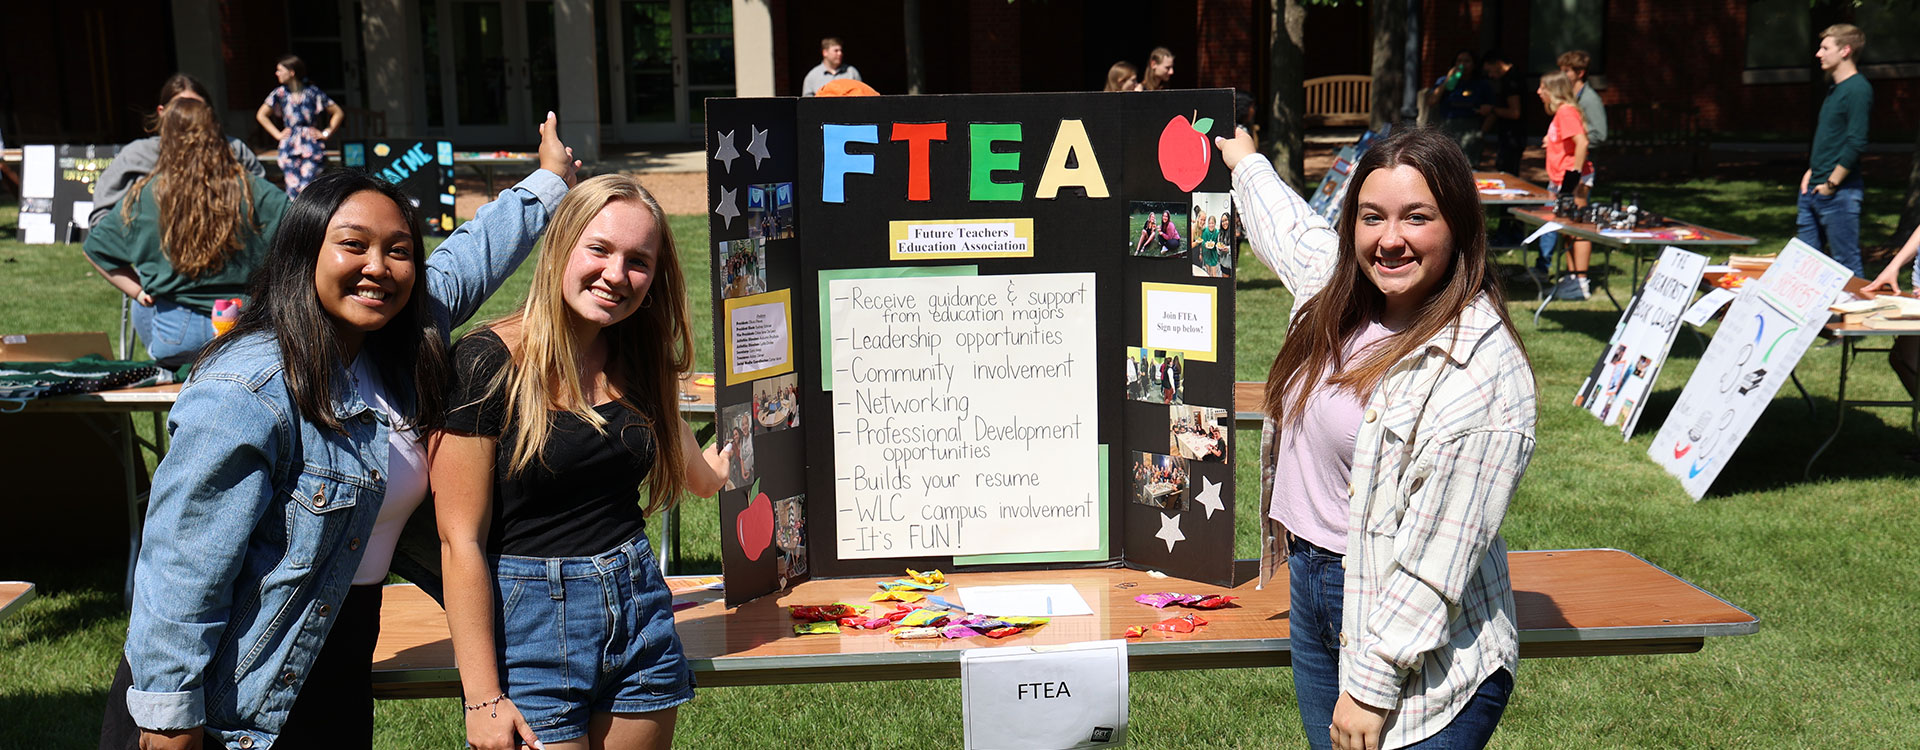 Students at the FTEA club table at OrgSmorg